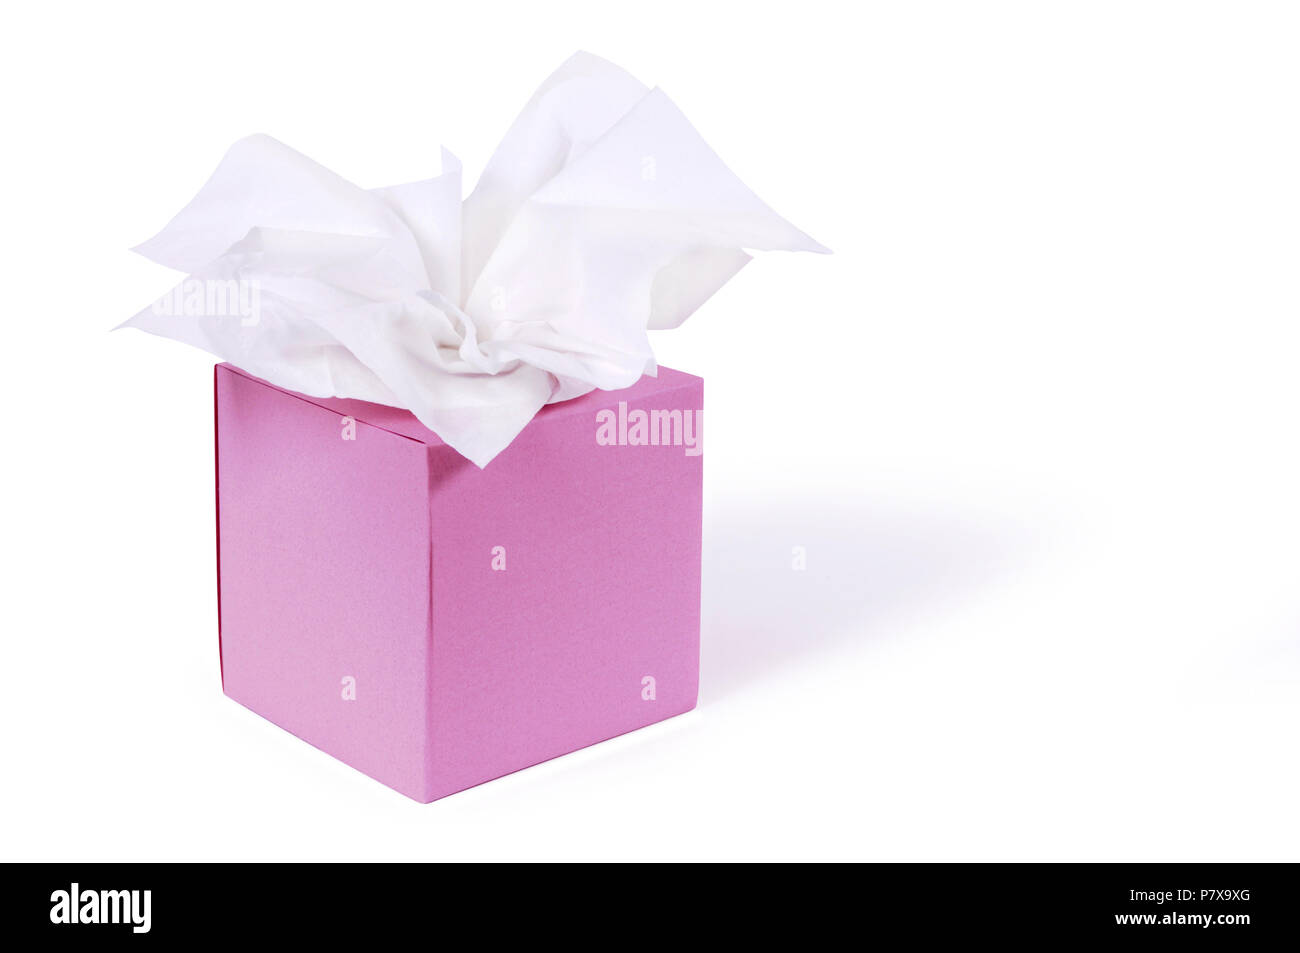 Tissues in blank pink box isolated on a white background. Stock Photo